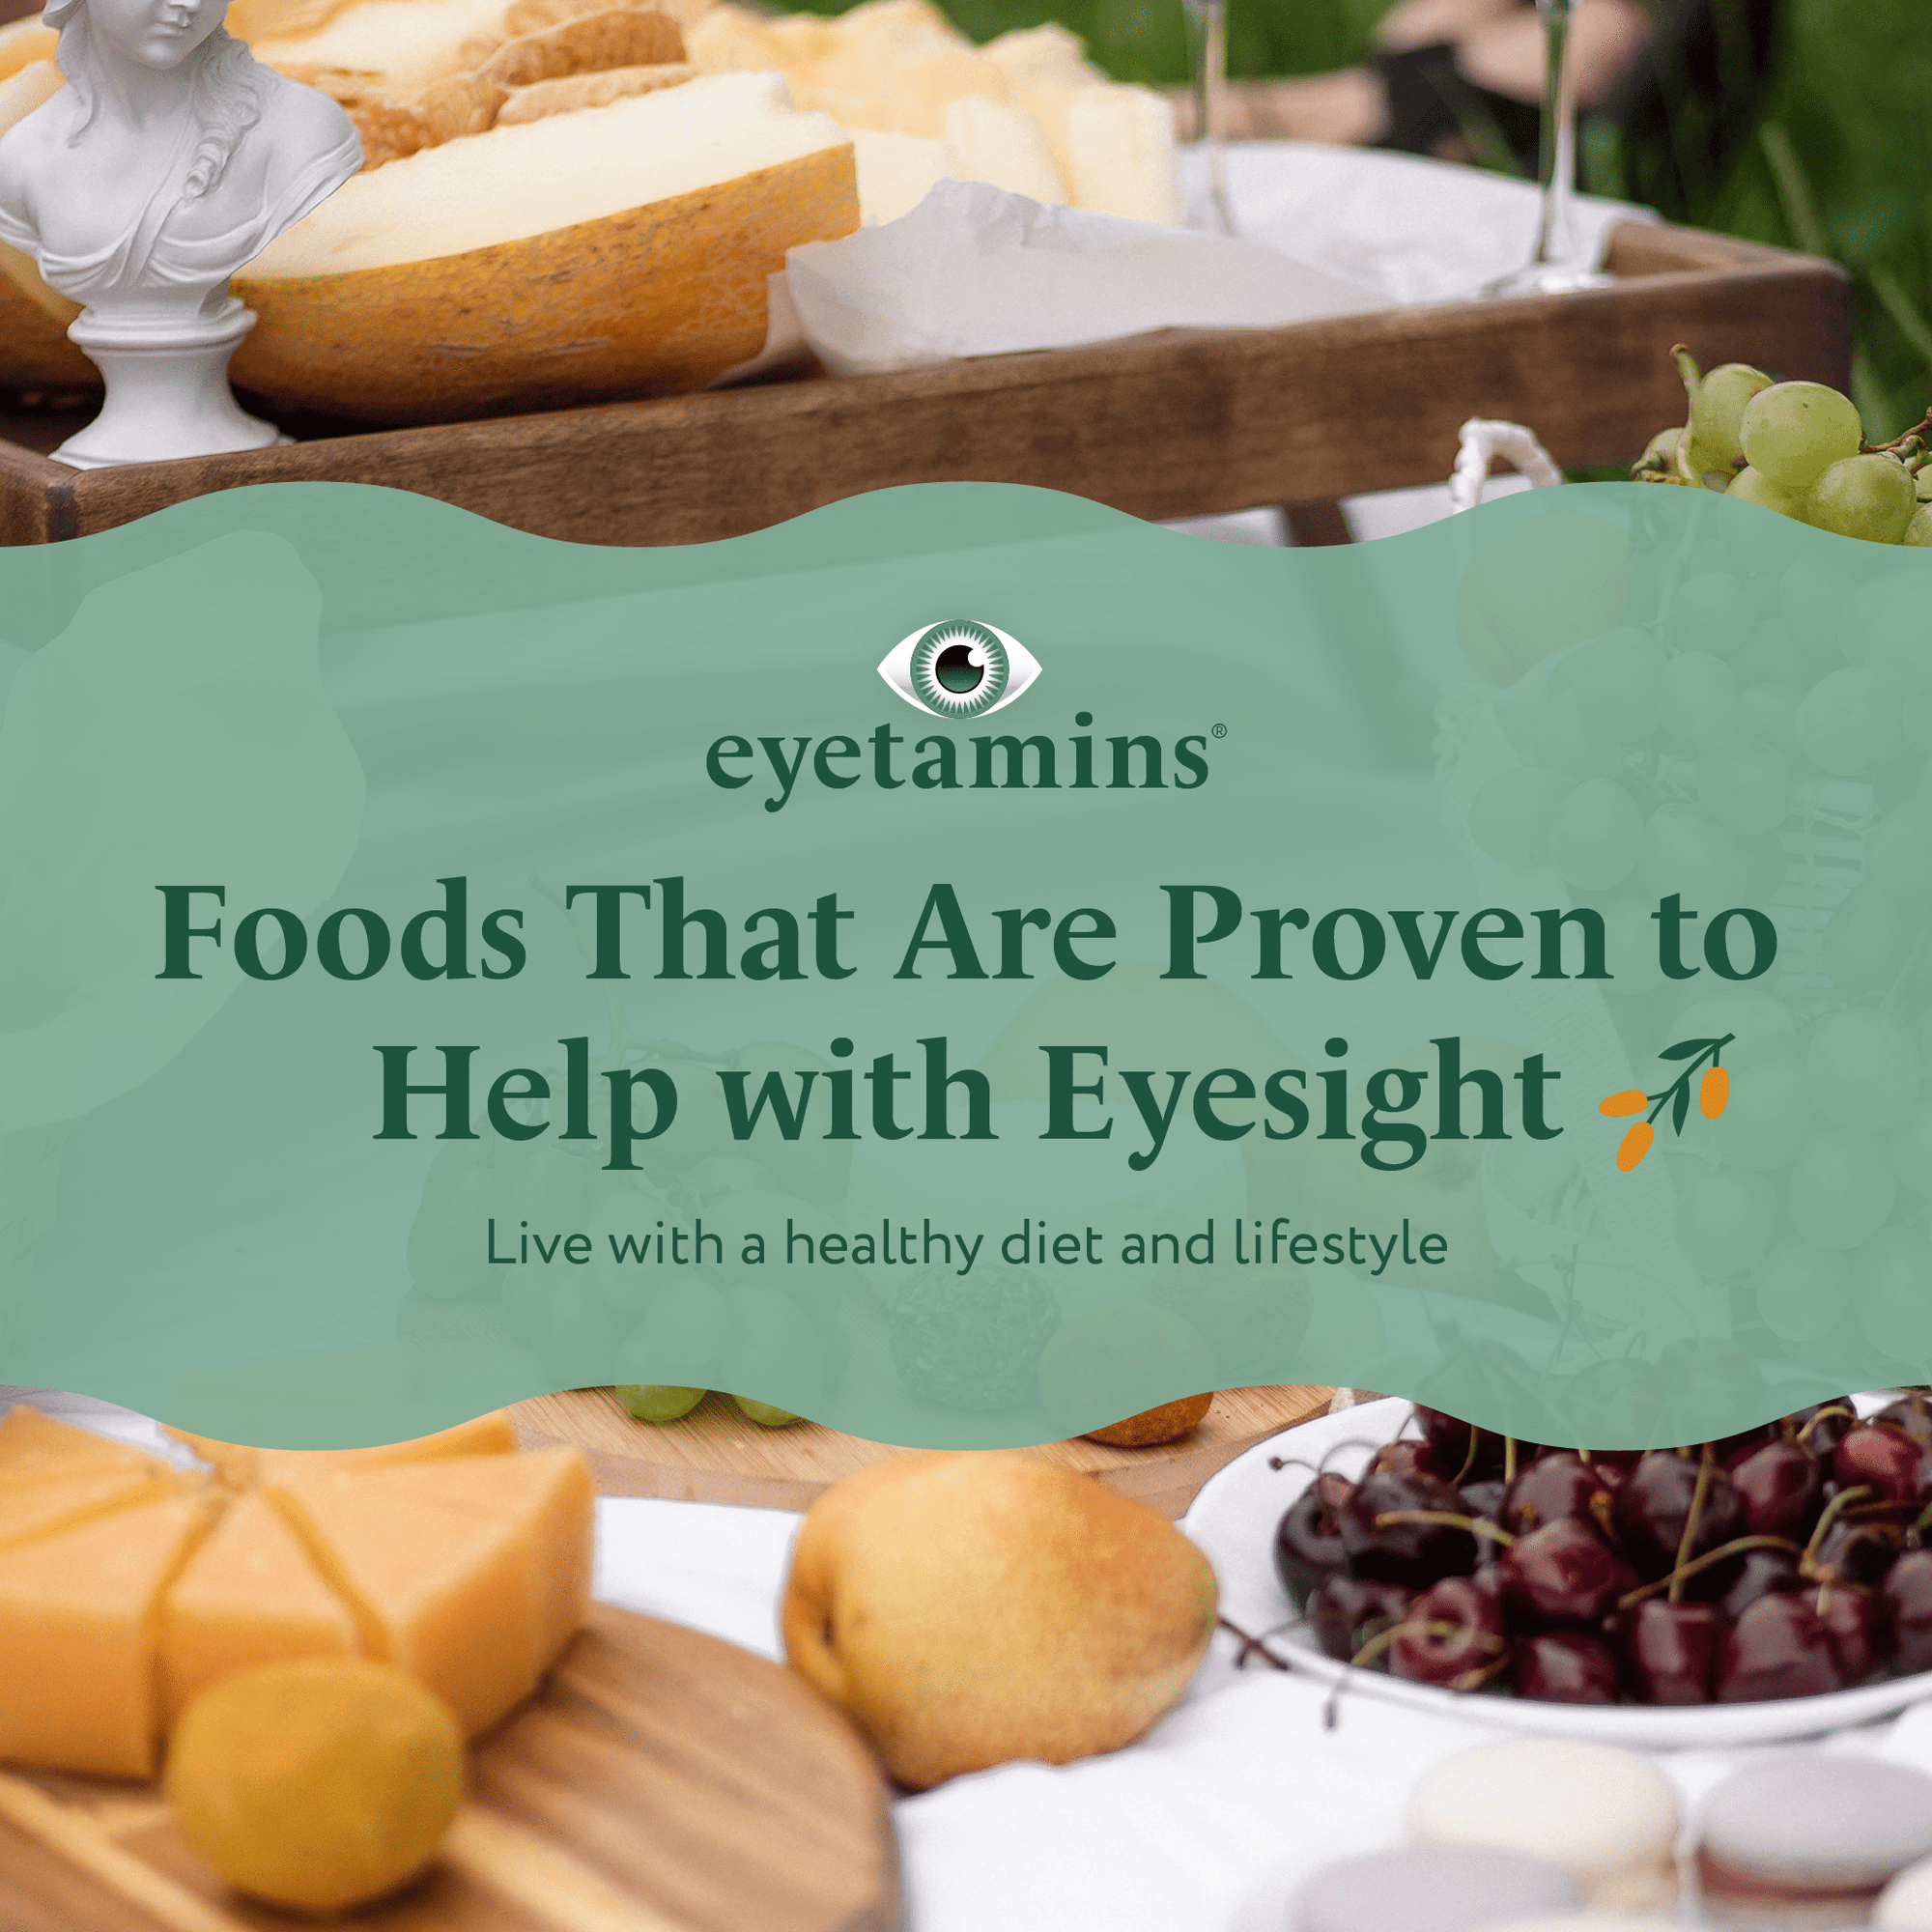 Eyetamins - Foods That Are Proven To Help With Eyesight